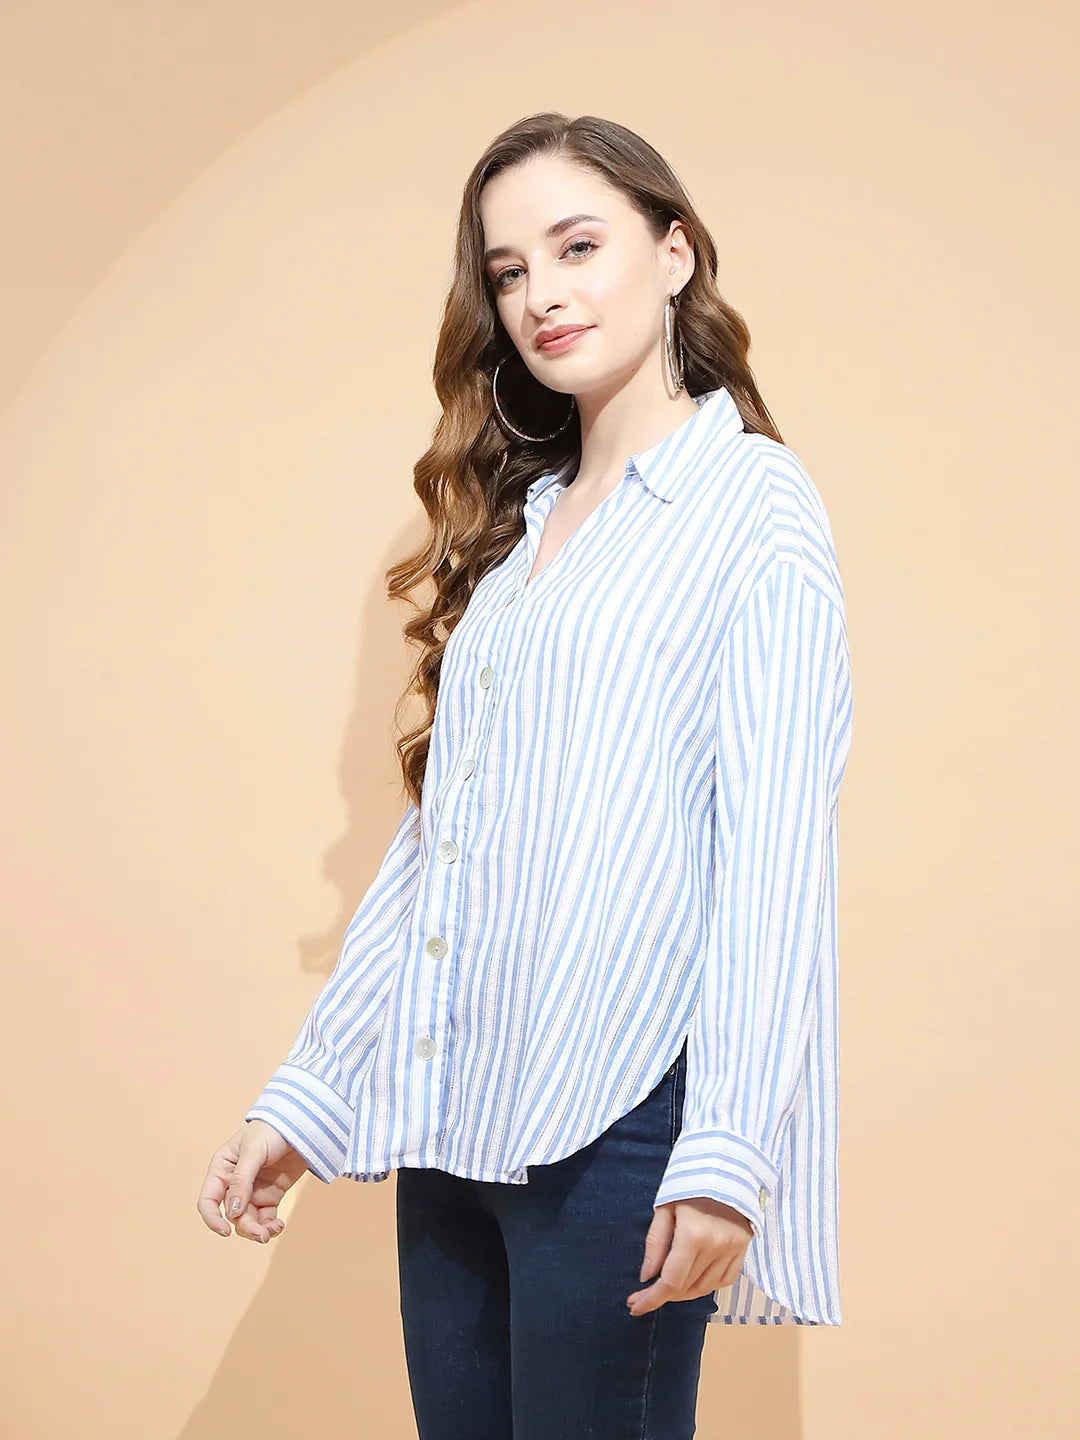 Blue And White Cotton Tailored Fit Shirt For Women